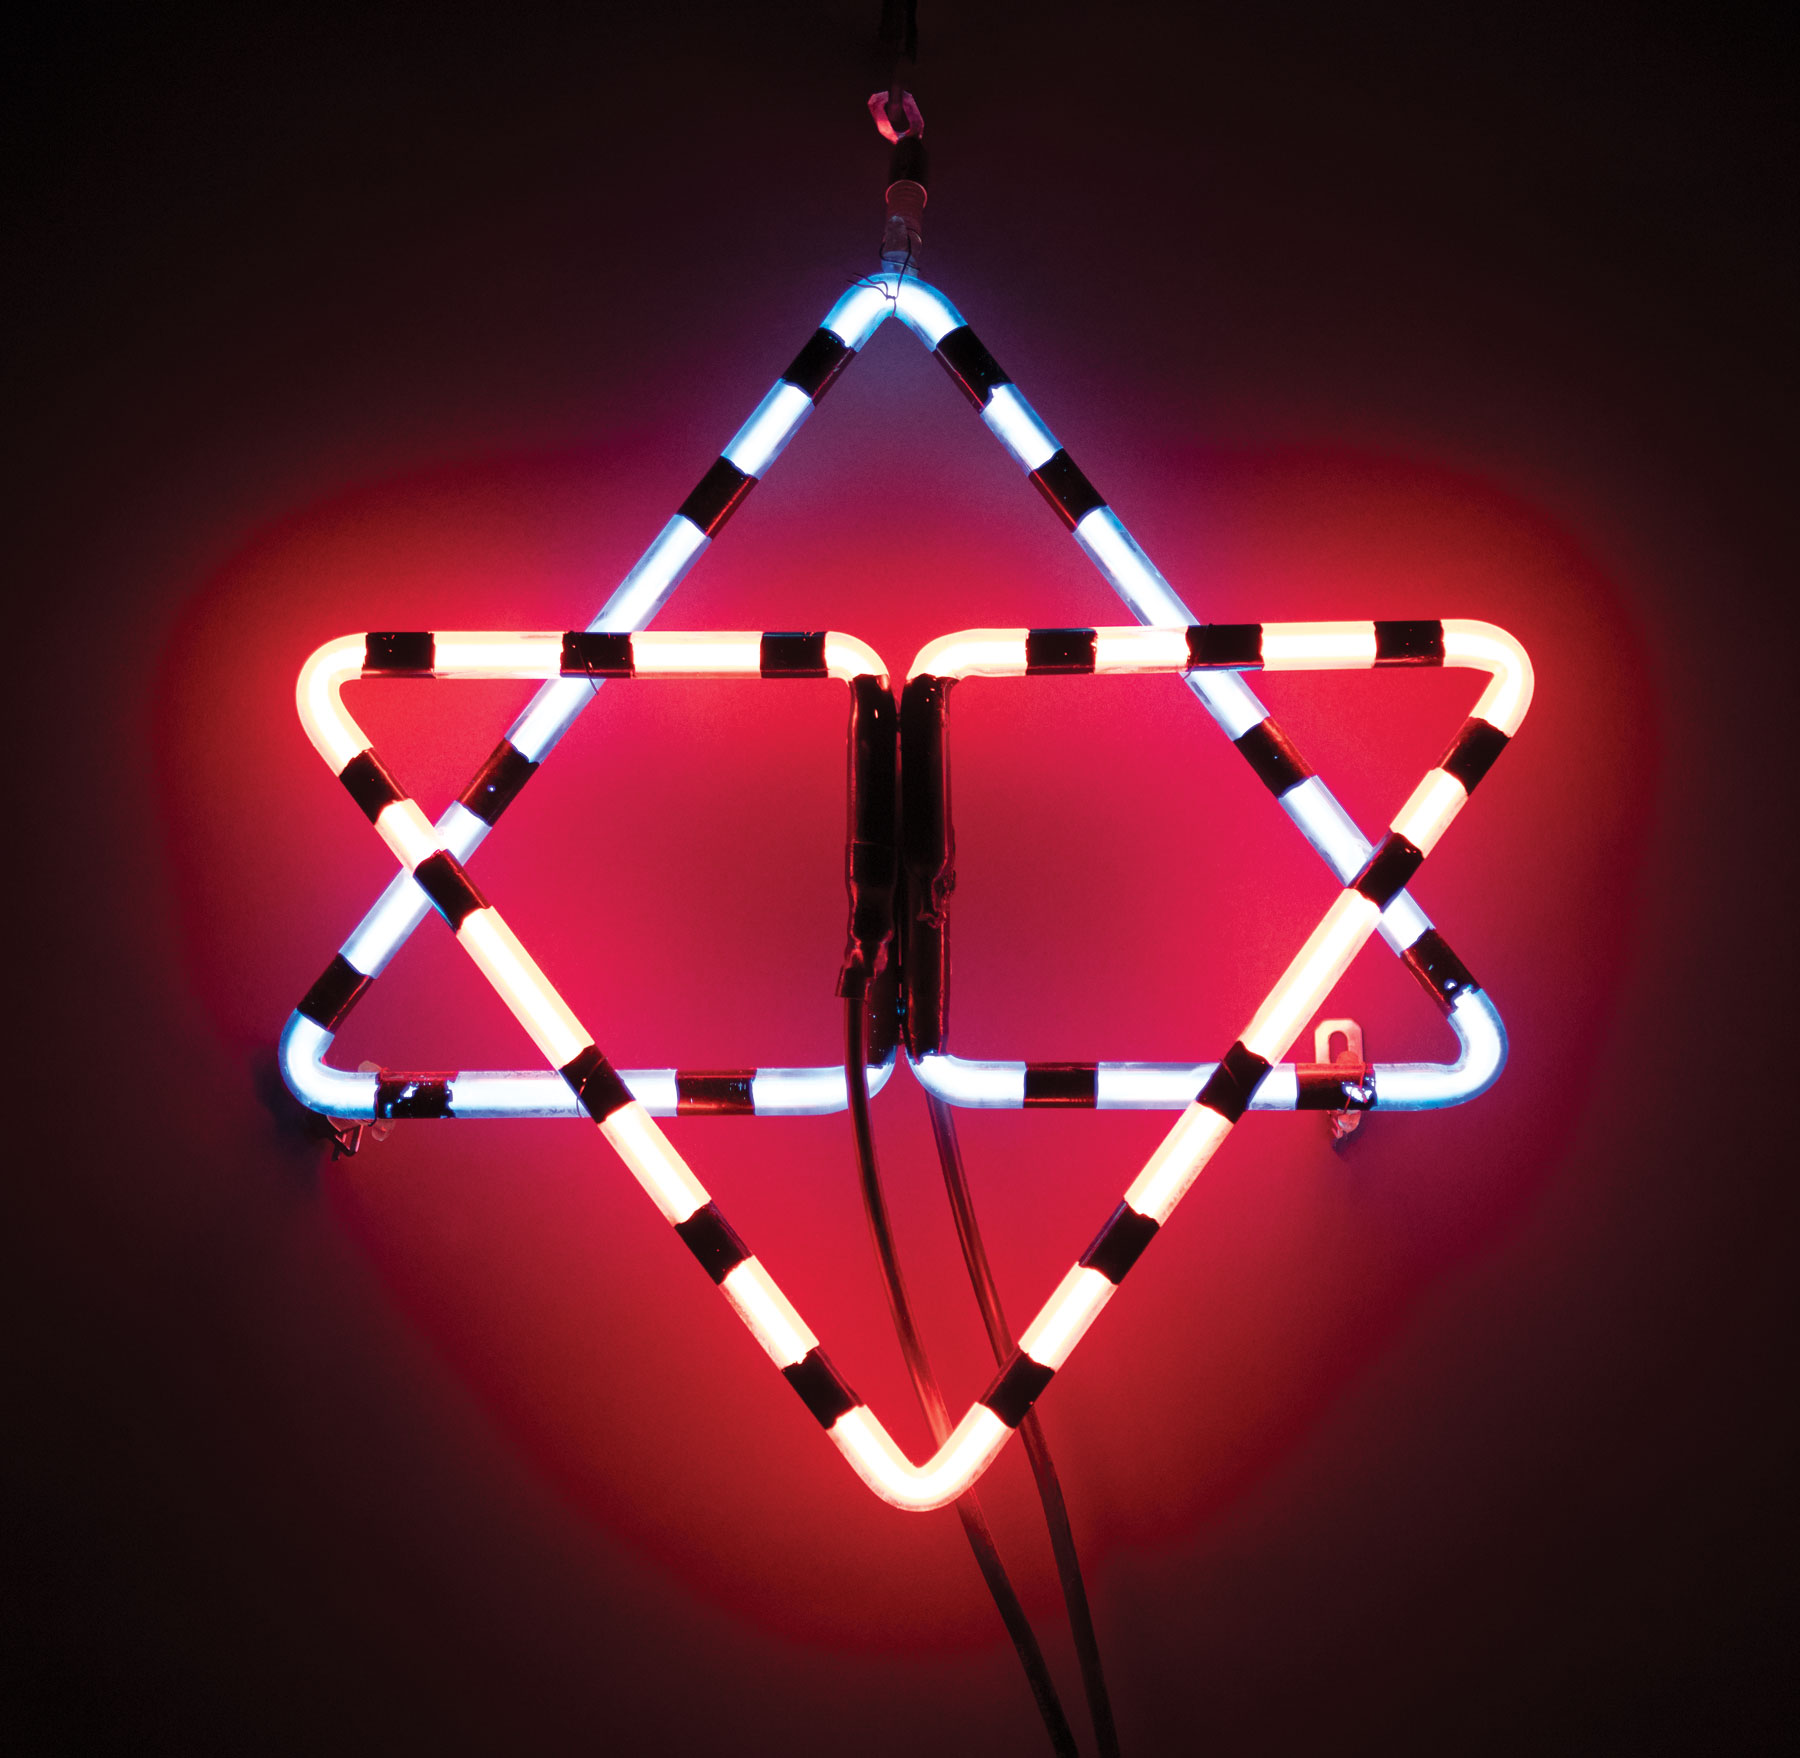 Keith Sonnier (American/Louisiana, 1941-2020), "Star of David", neon and transformer, unsigned, 12